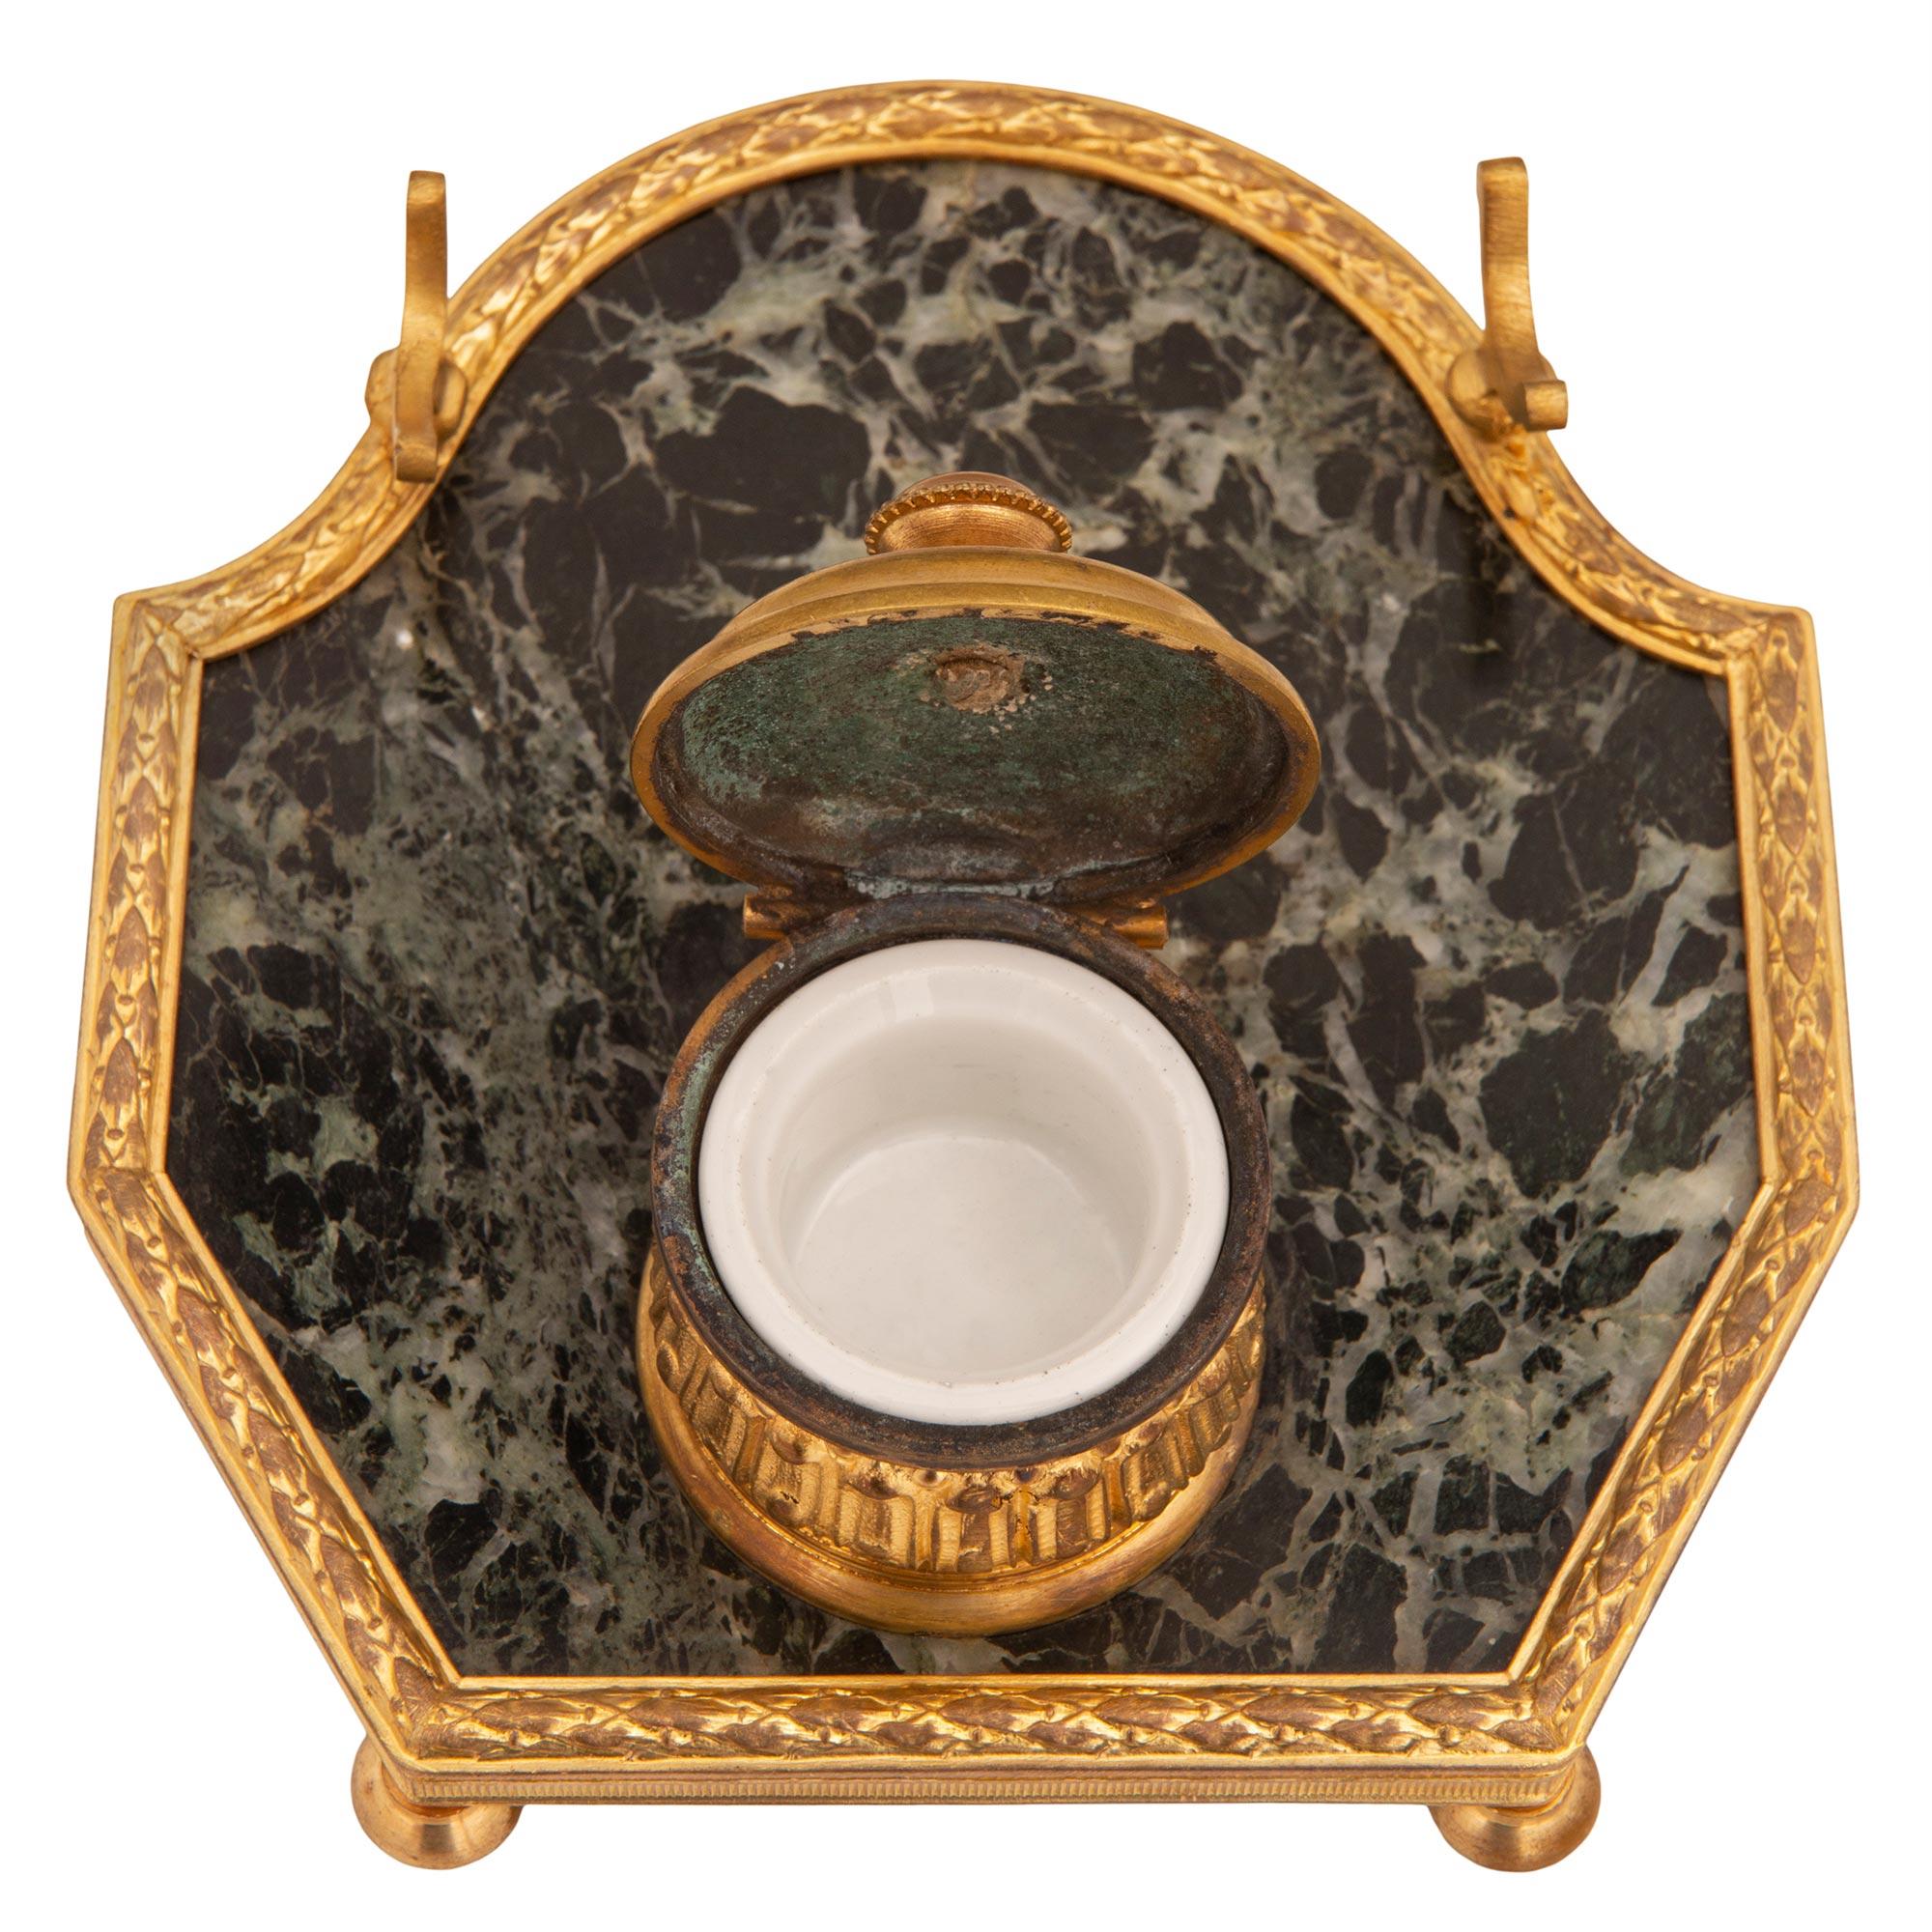 An elegant and charming French 19th century Louis XVI st. ormolu and Vert de Patricia marble inkwell. The inkwell is raised by Fine topie shaped feet below the elegantly shaped wrap around ormolu band with a fluted, berried laurel and beaded design.